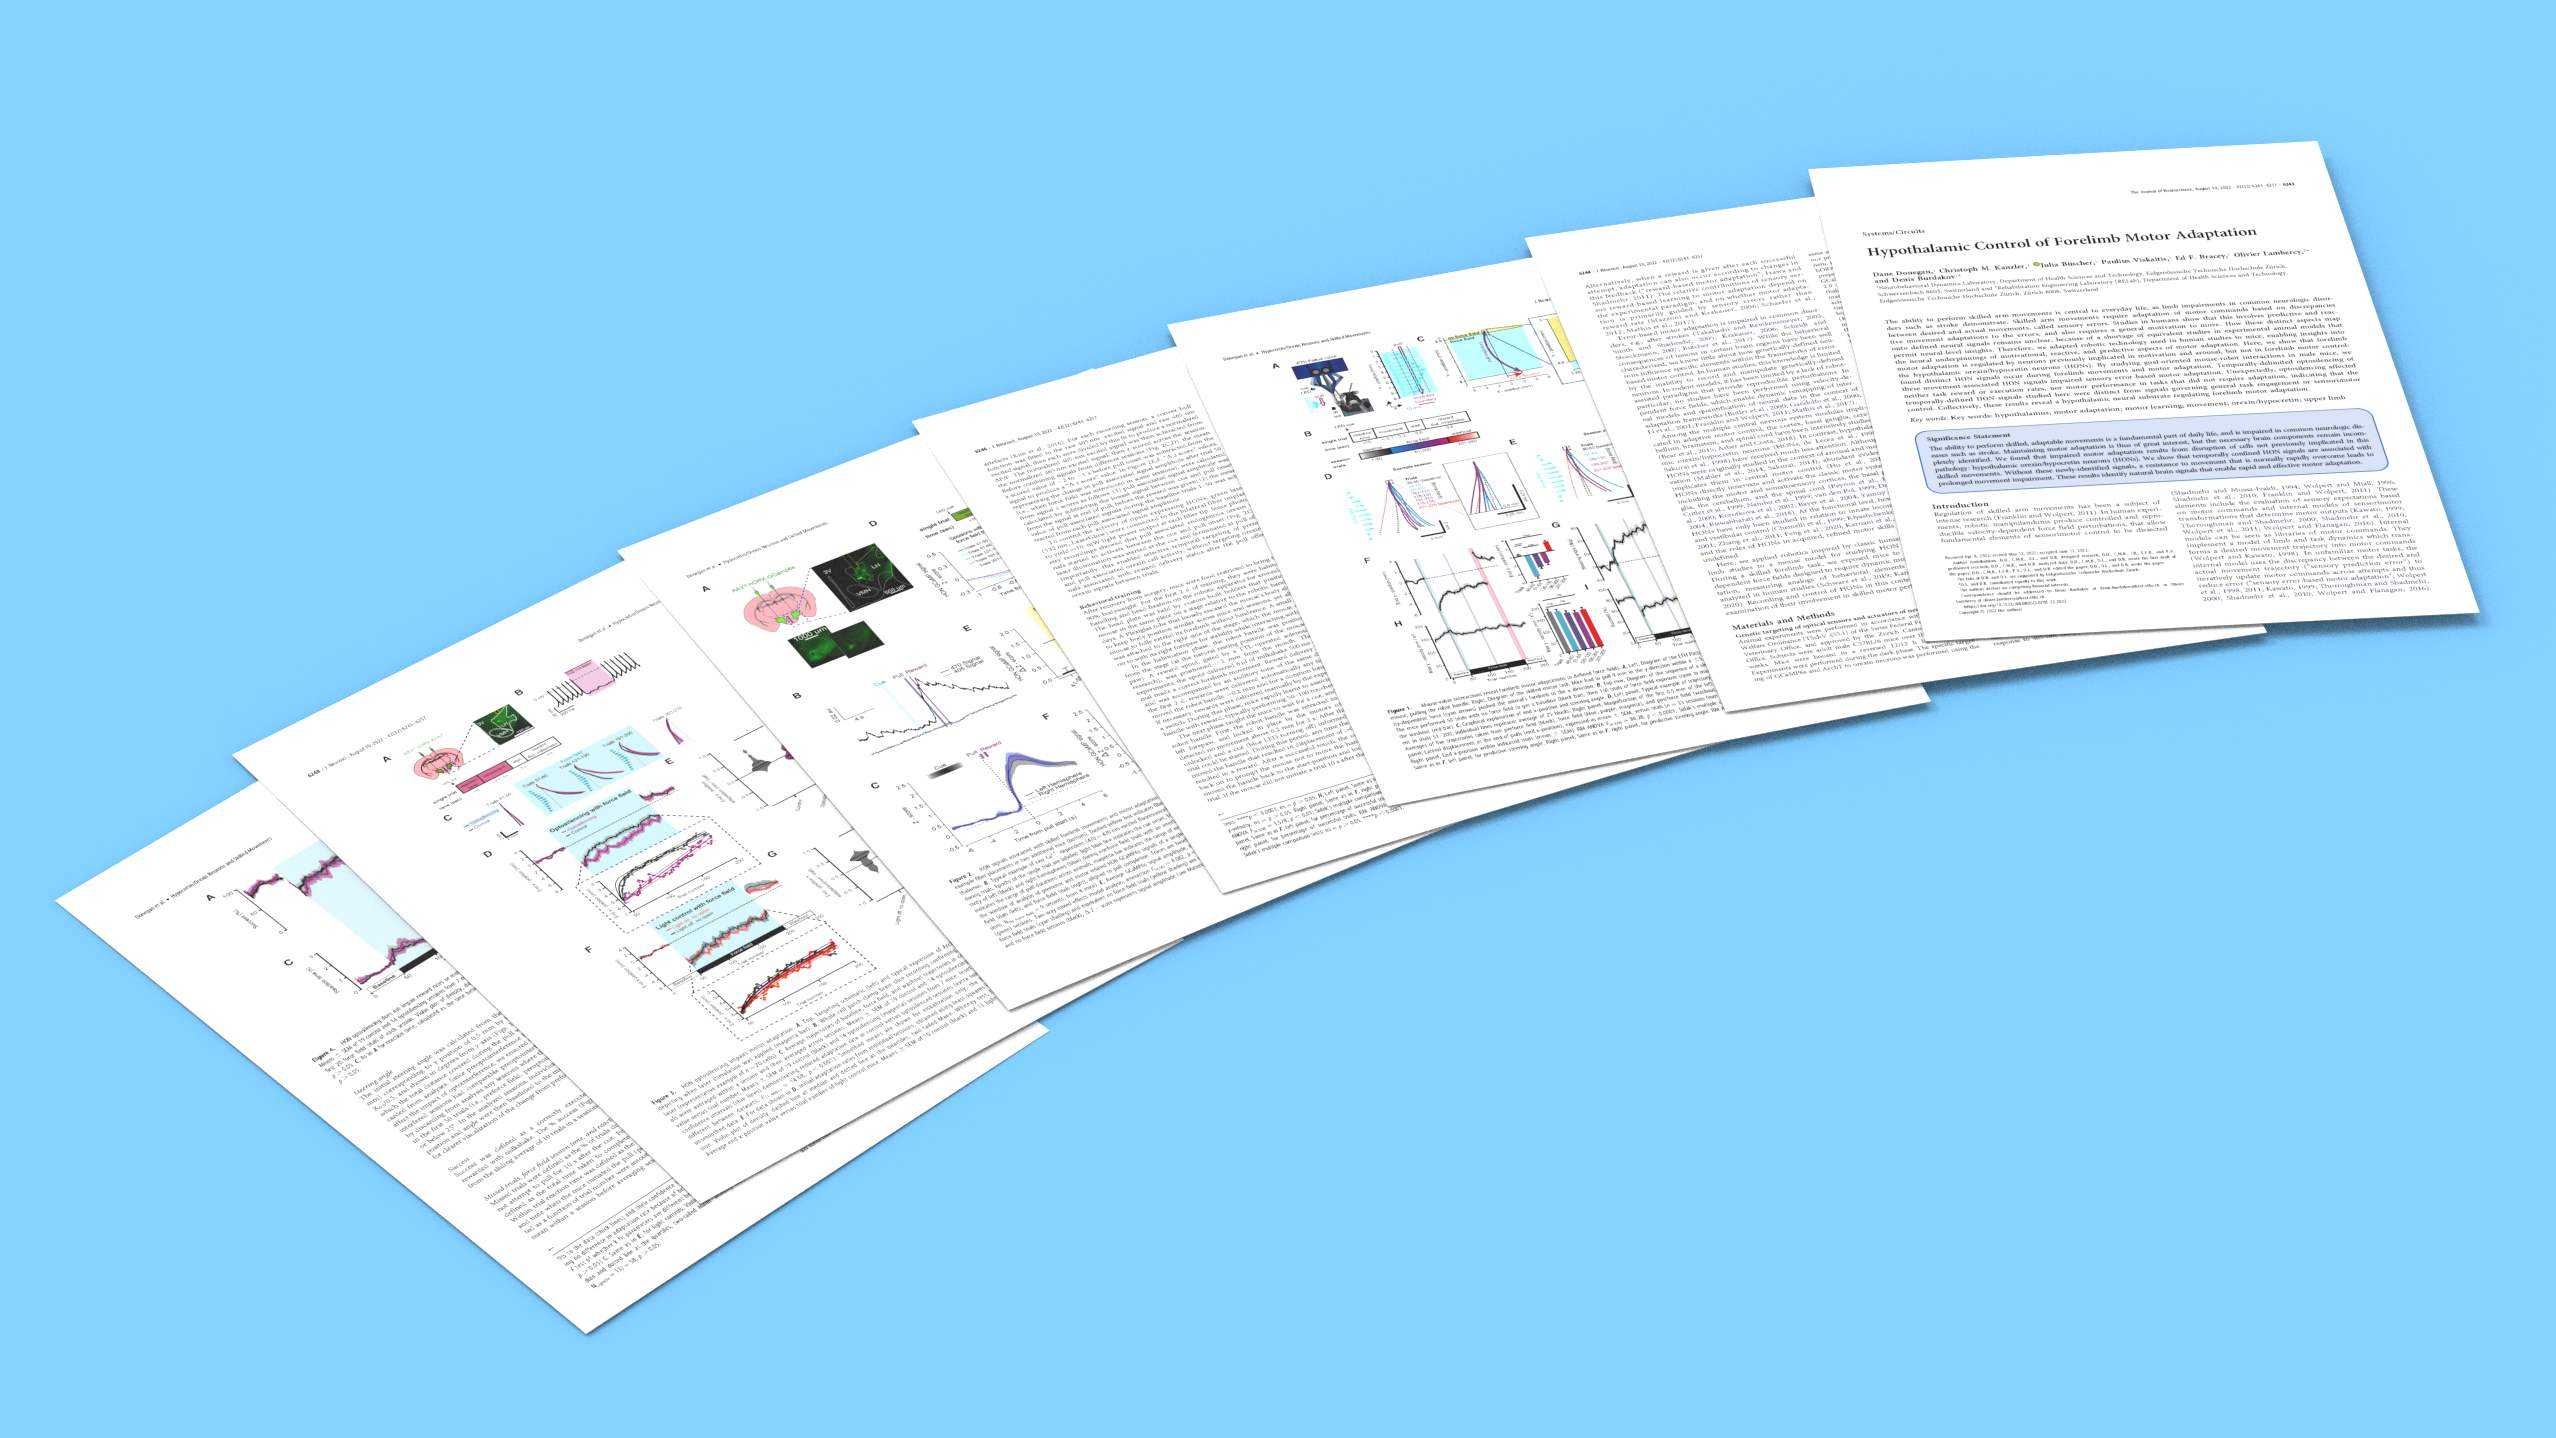 Enlarged view: Visualisation with Publication